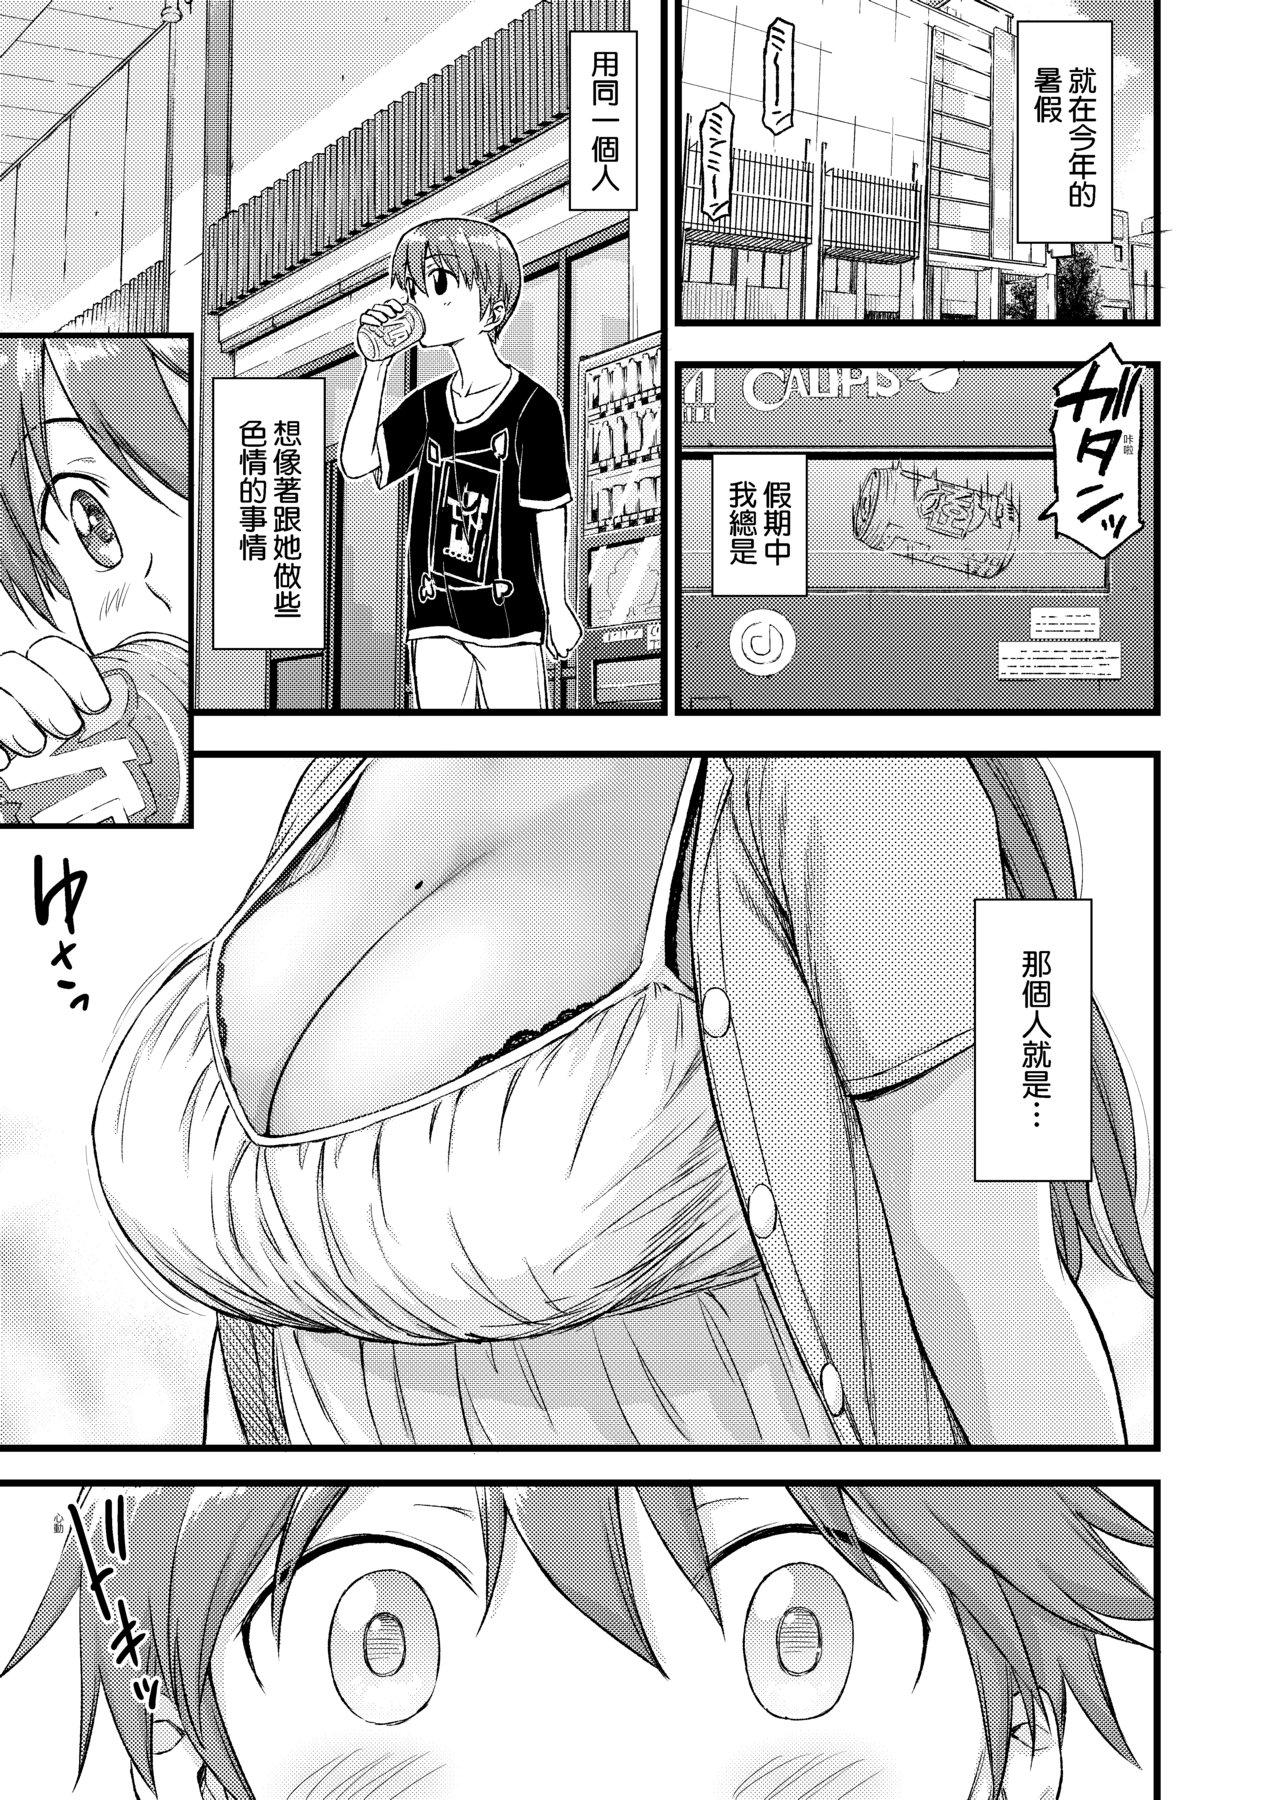 Gay Oppai na Natsuyasumi - Summer Vacation With Oppai | 乳香四溢的暑假 Amazing - Page 10